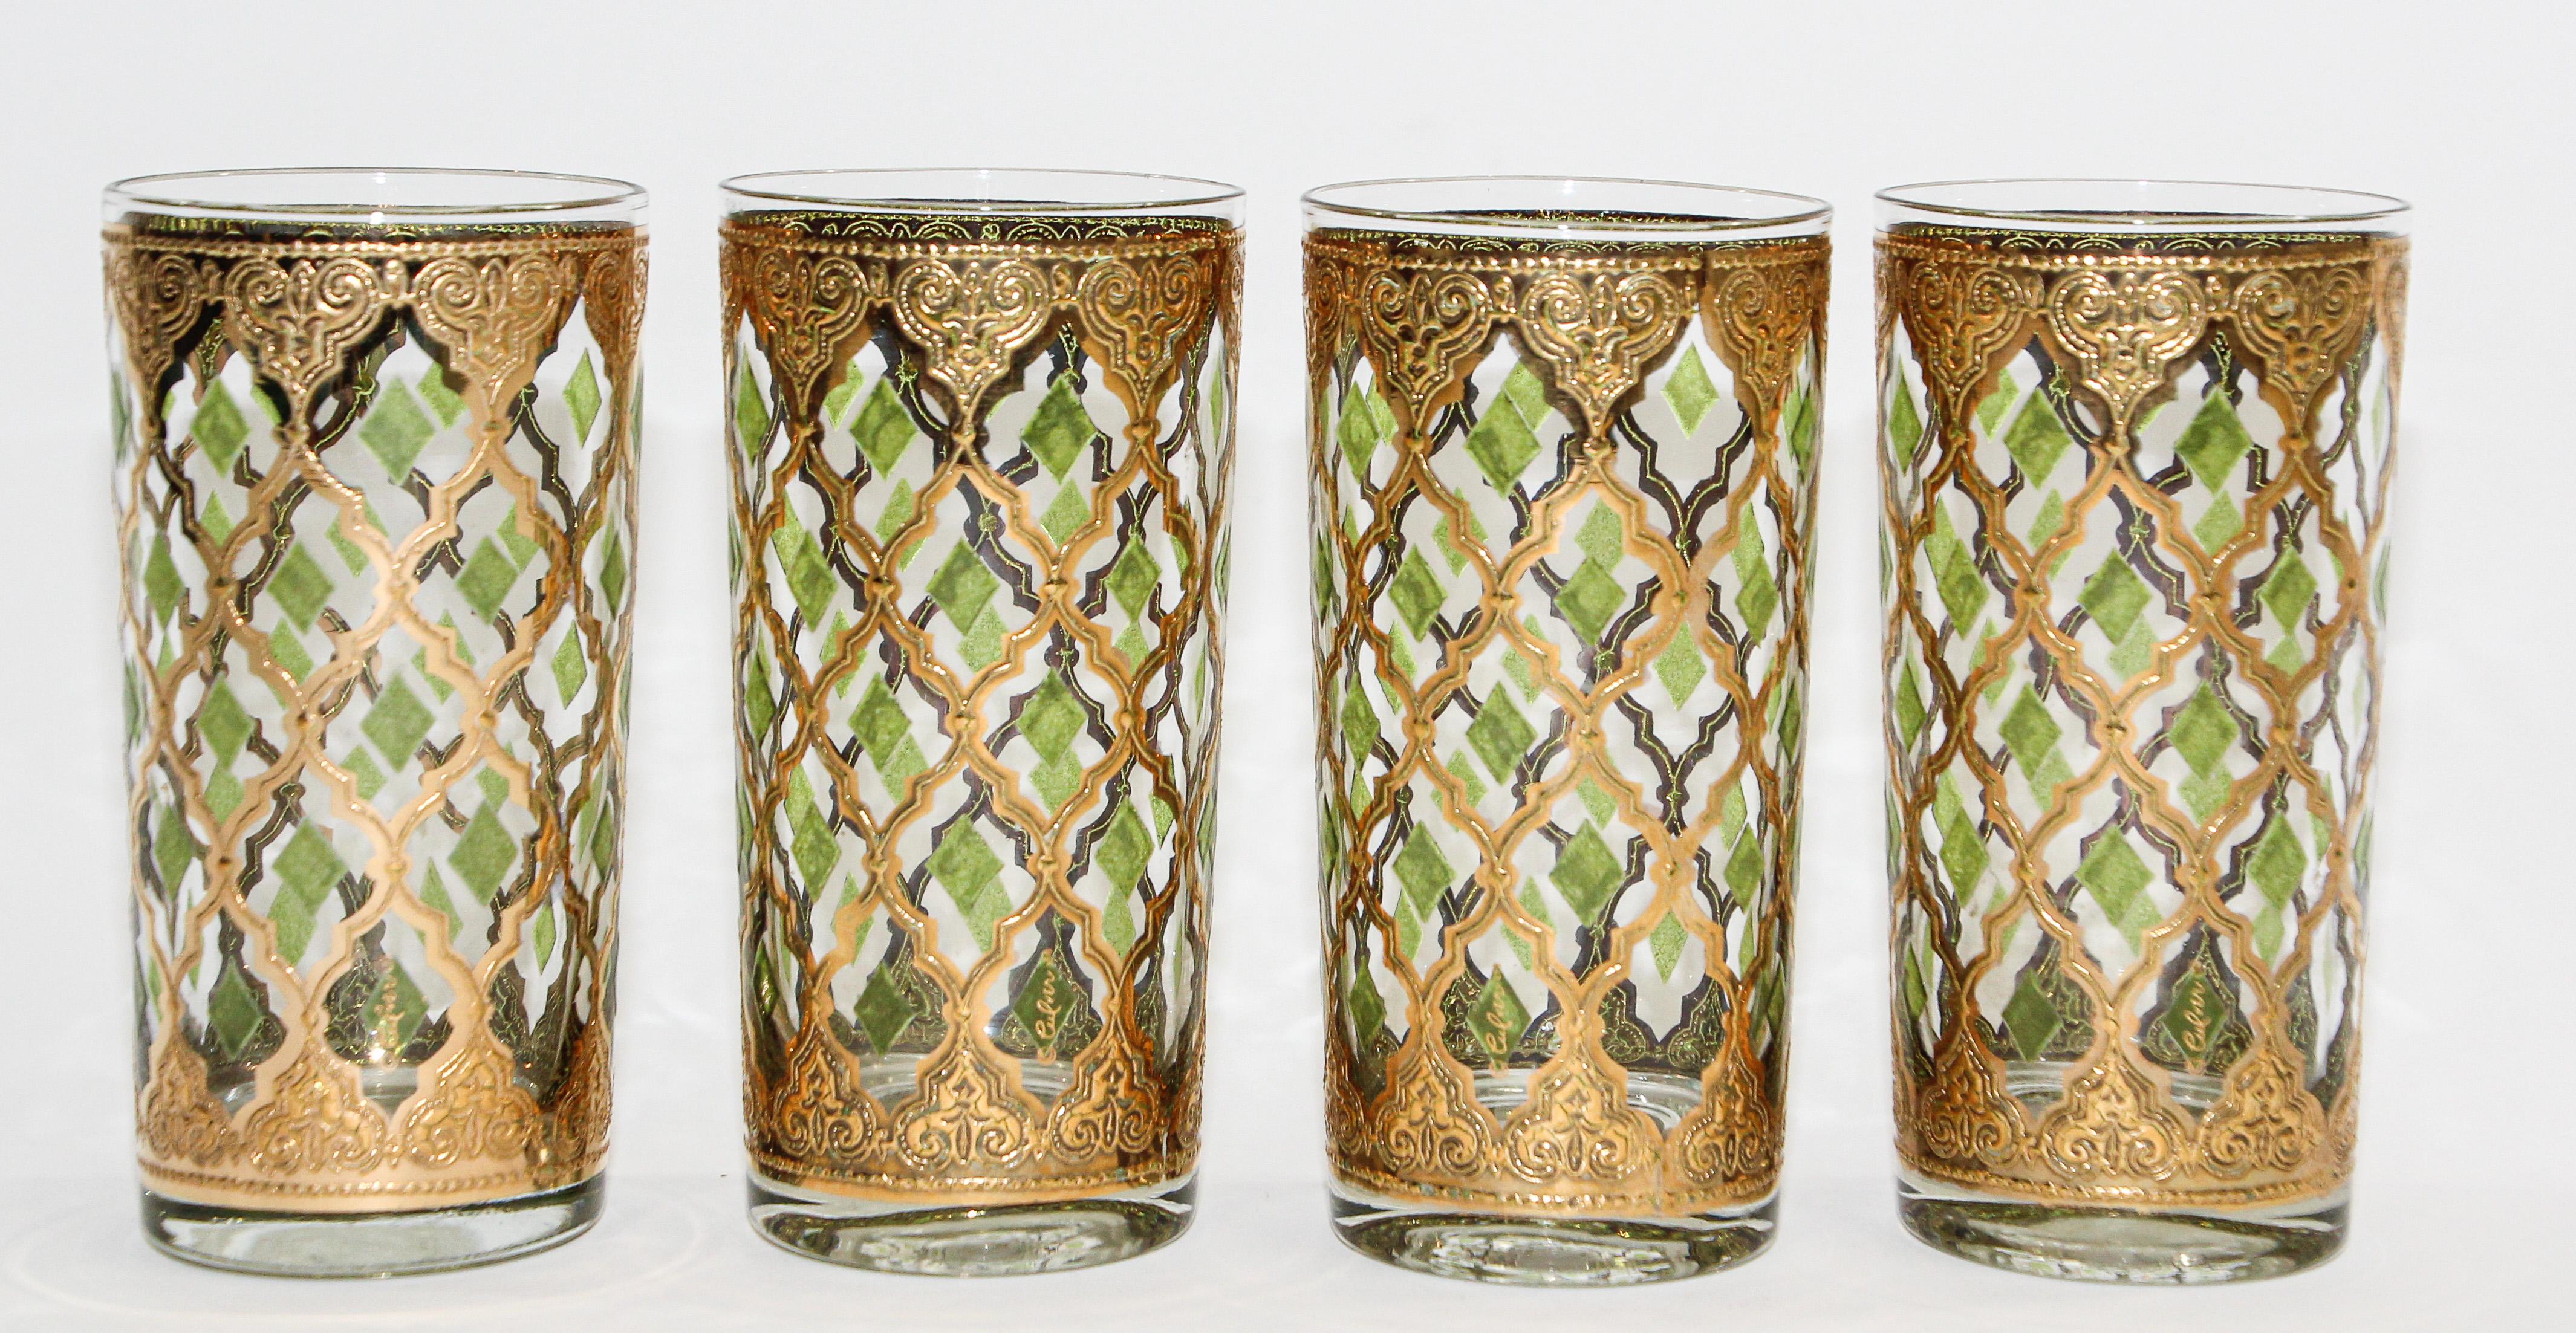 Elegant vintage mid-century Culver barware glasses with Valencia pattern in a gold leaf finish.
Set includes 4 Culver highball glasses in Valencia Moorish style design.
This fabulous vintage Culver set of barware with 22-carat gold decoration is